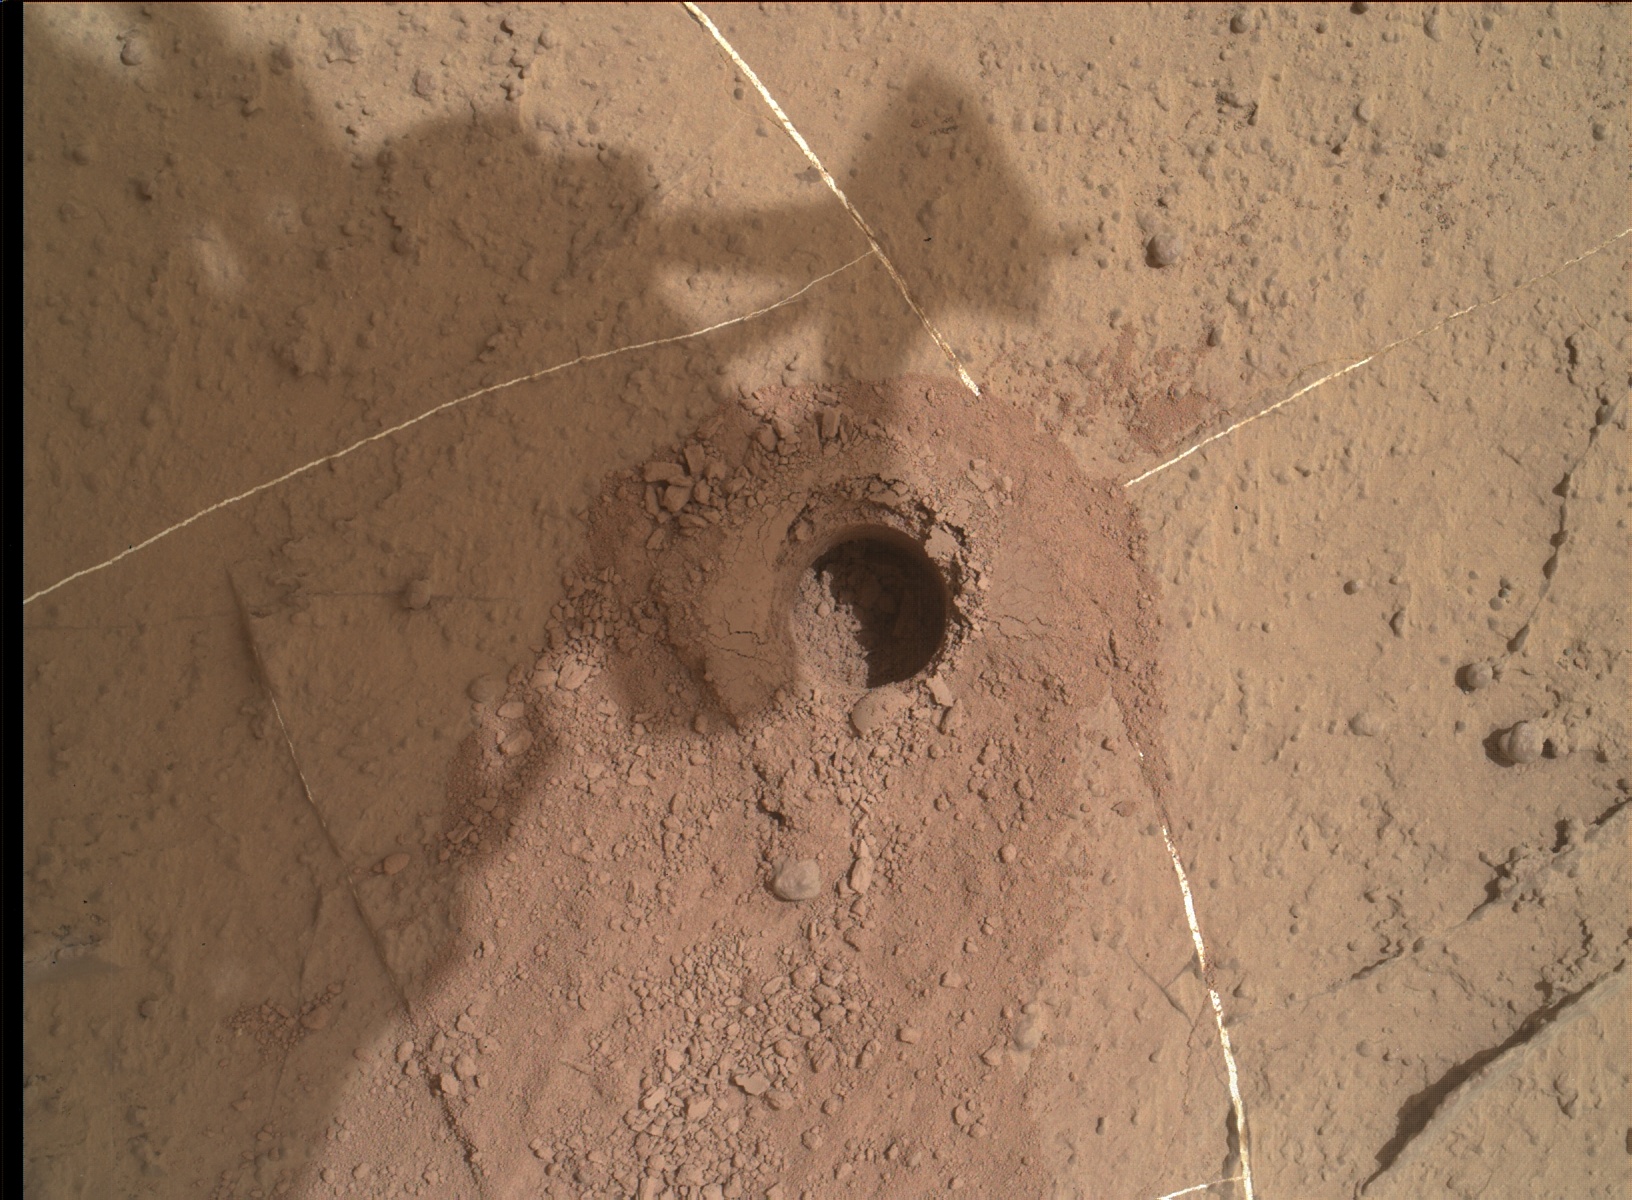 Nasa's Mars rover Curiosity acquired this image using its Mars Hand Lens Imager (MAHLI) on Sol 1495